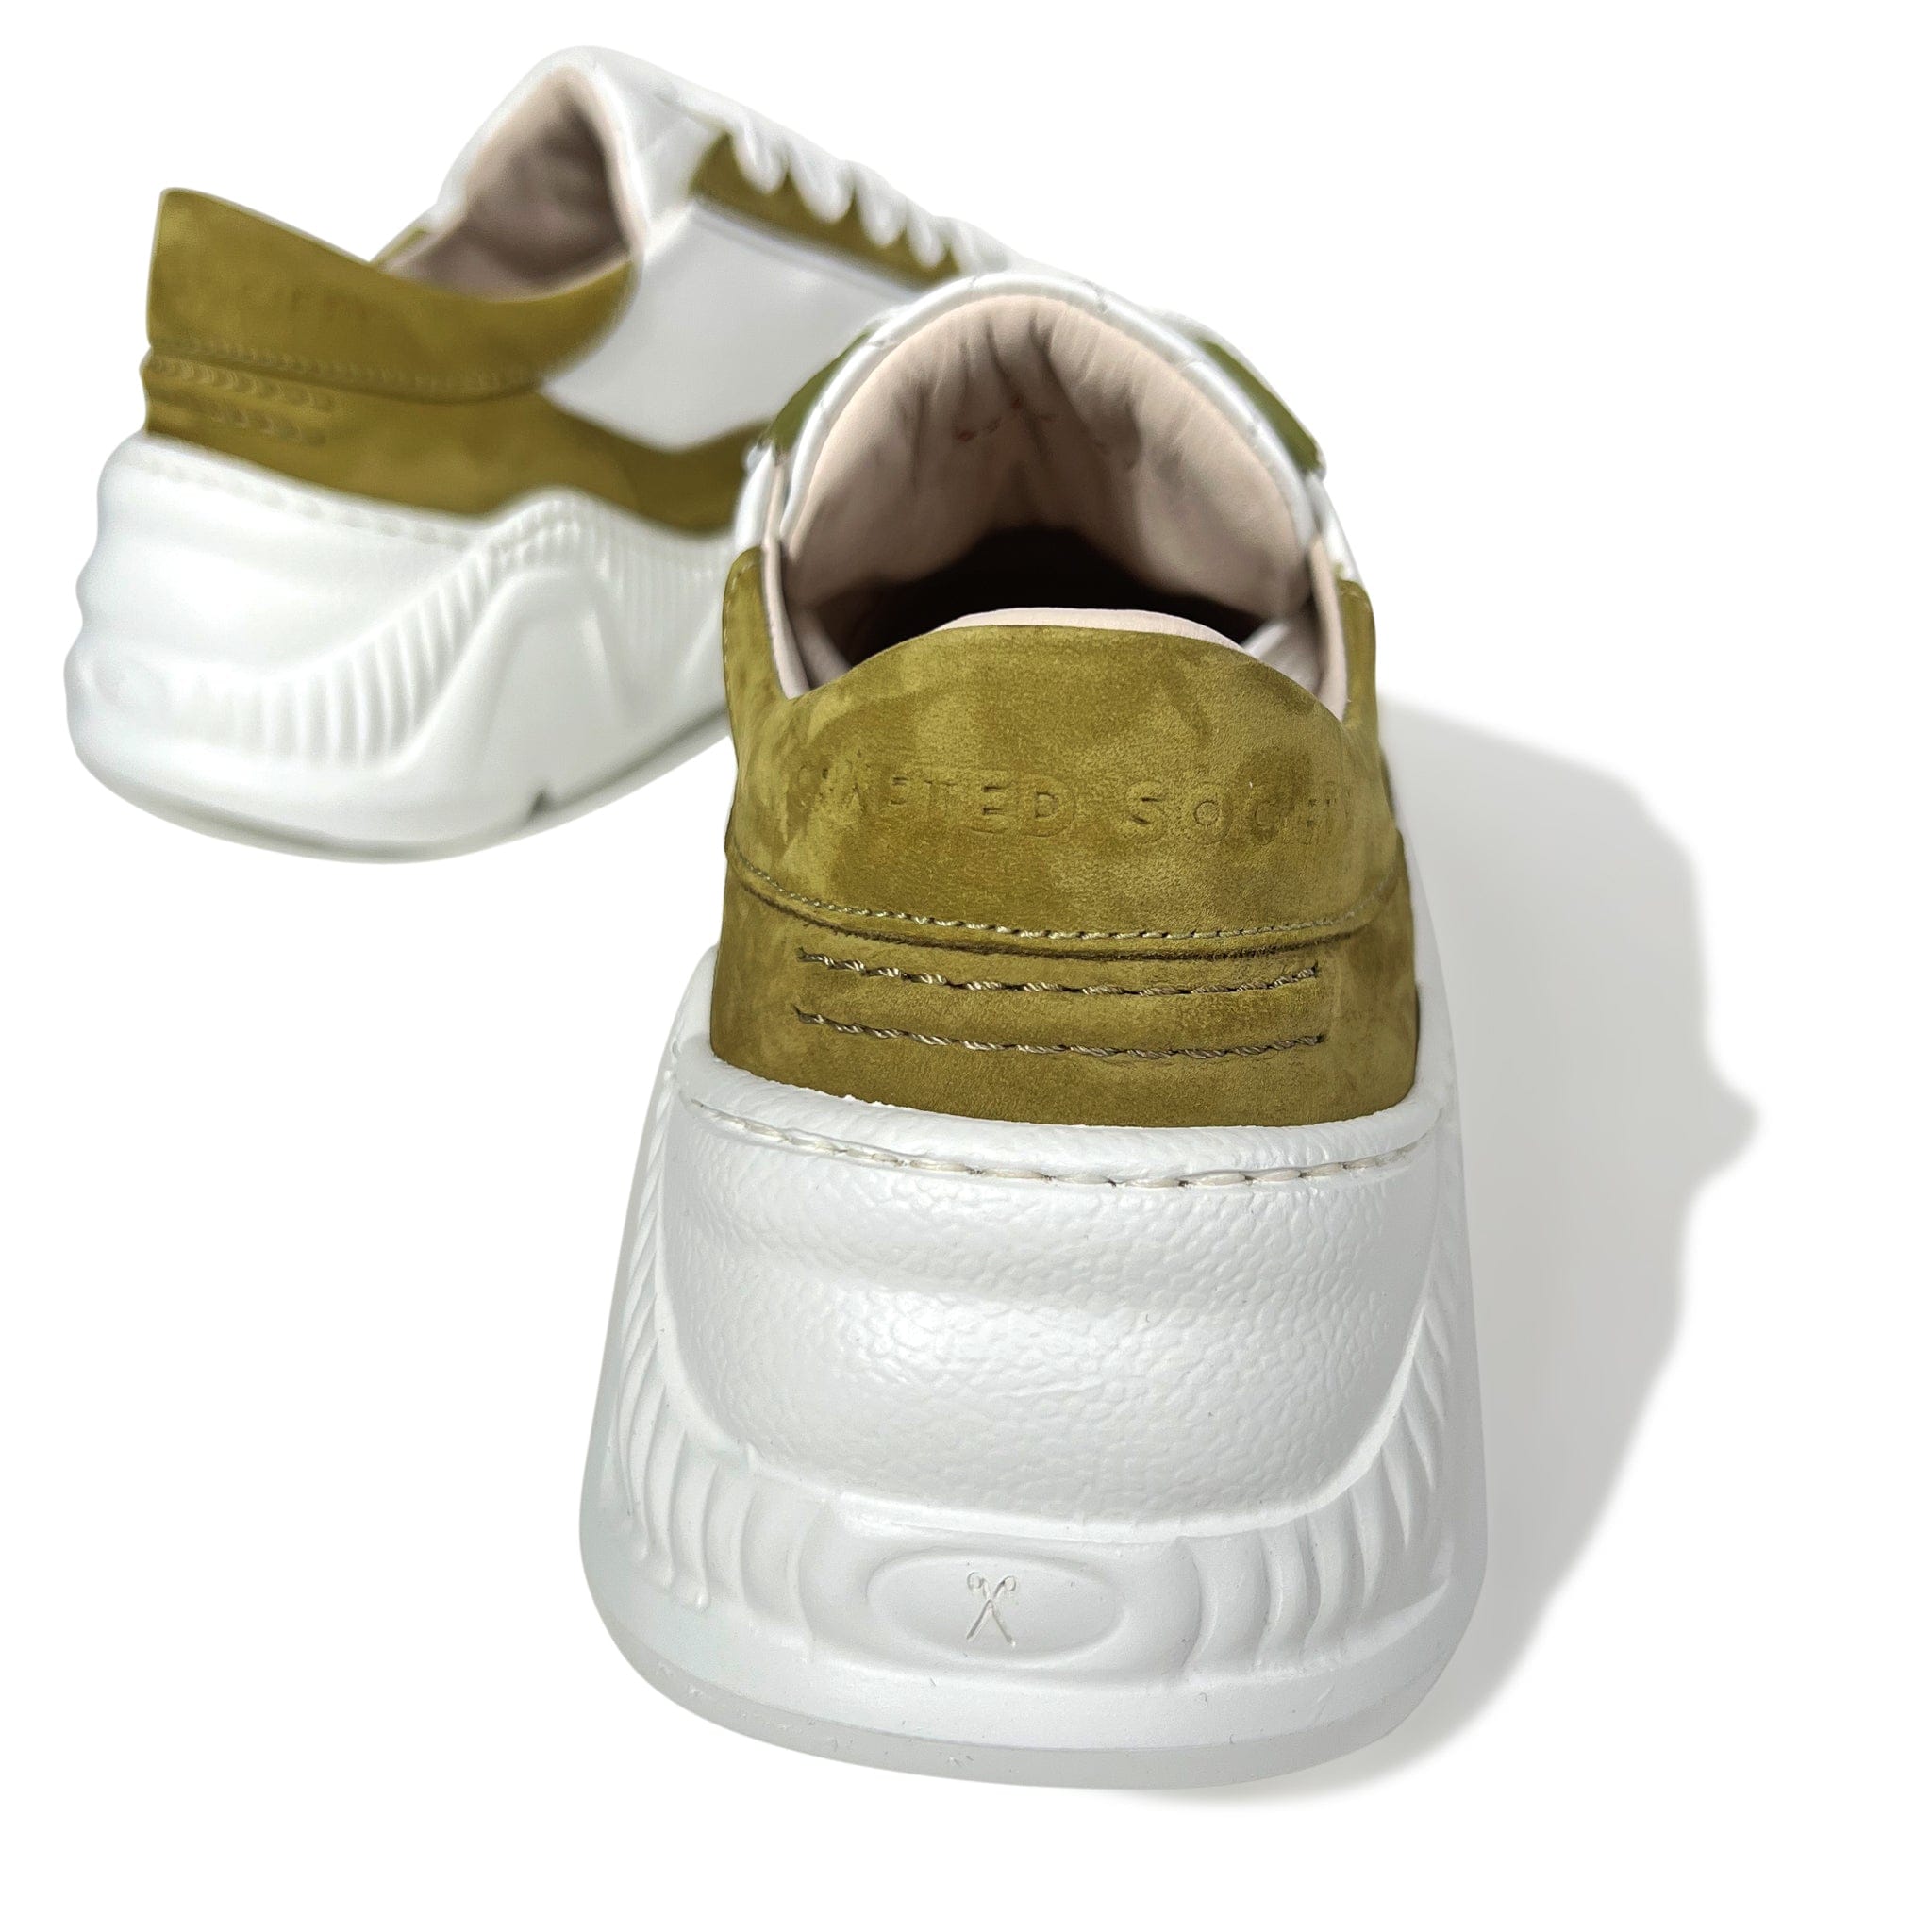 Nesto Low Top Italian Leathern Sneaker | Light Olive and White | White Outsole | Made in Italy